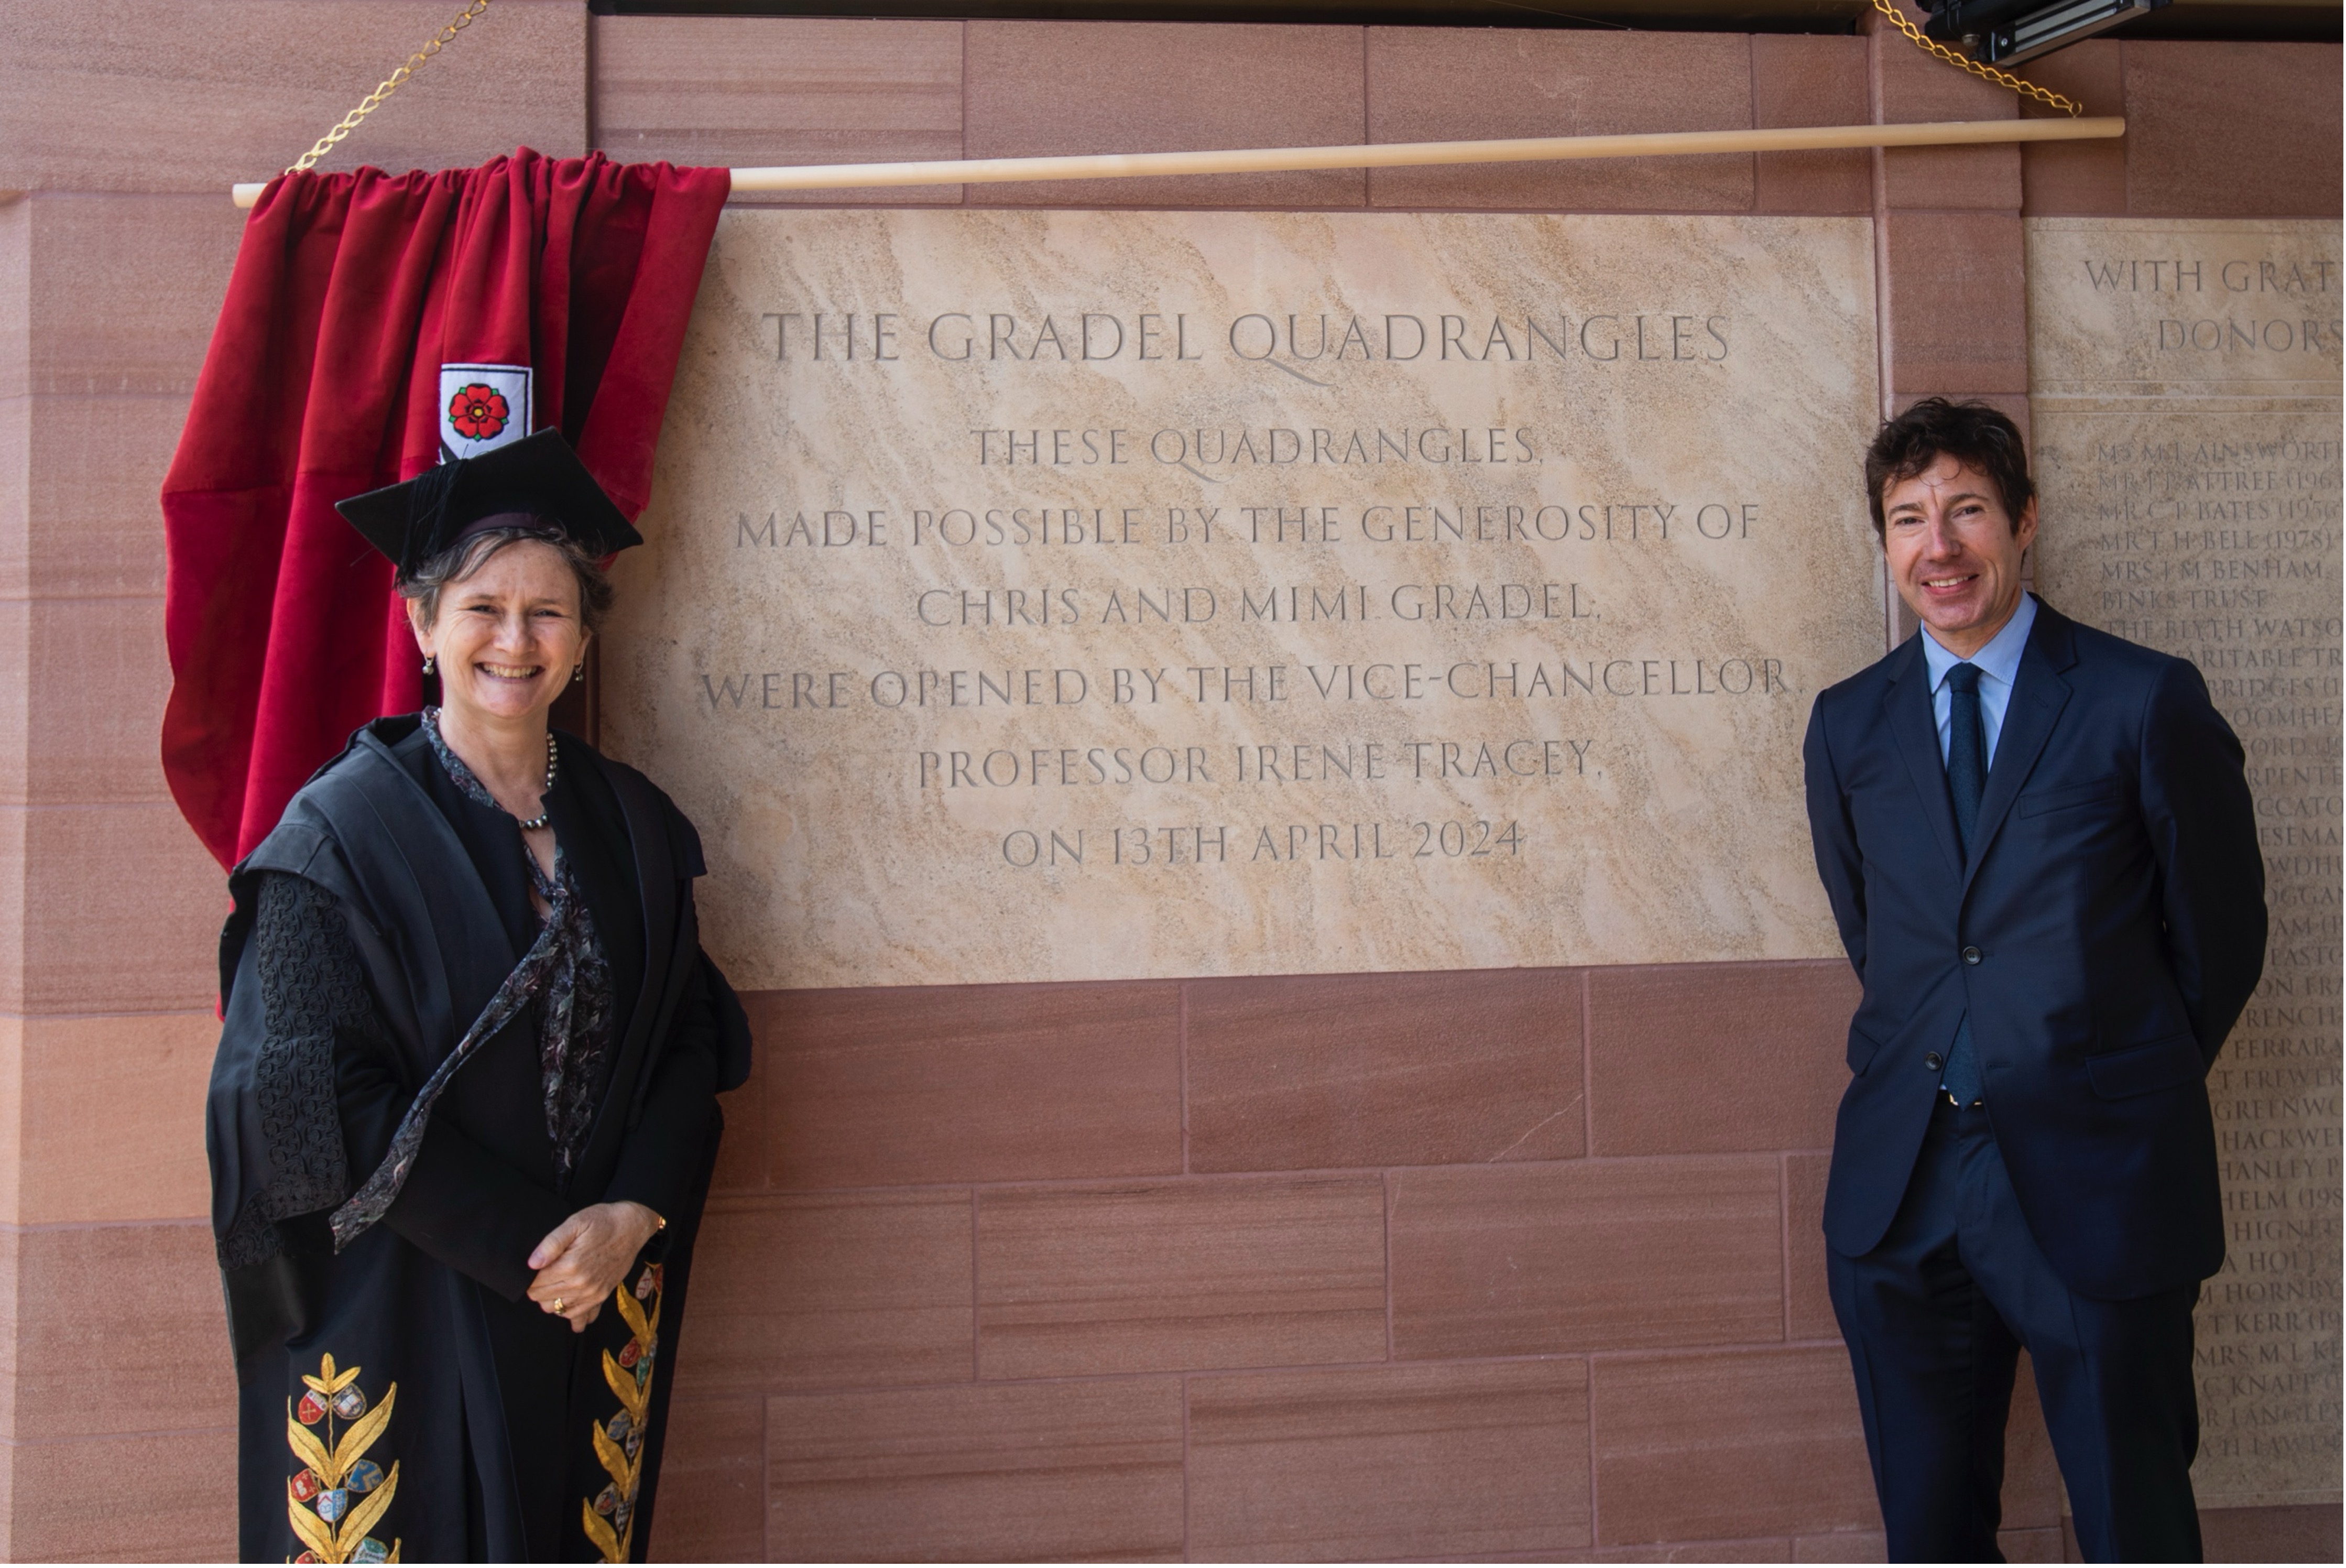 The VC and Chris Gradel stand by the ceremonial stone in New College's Gradel Quadrangles